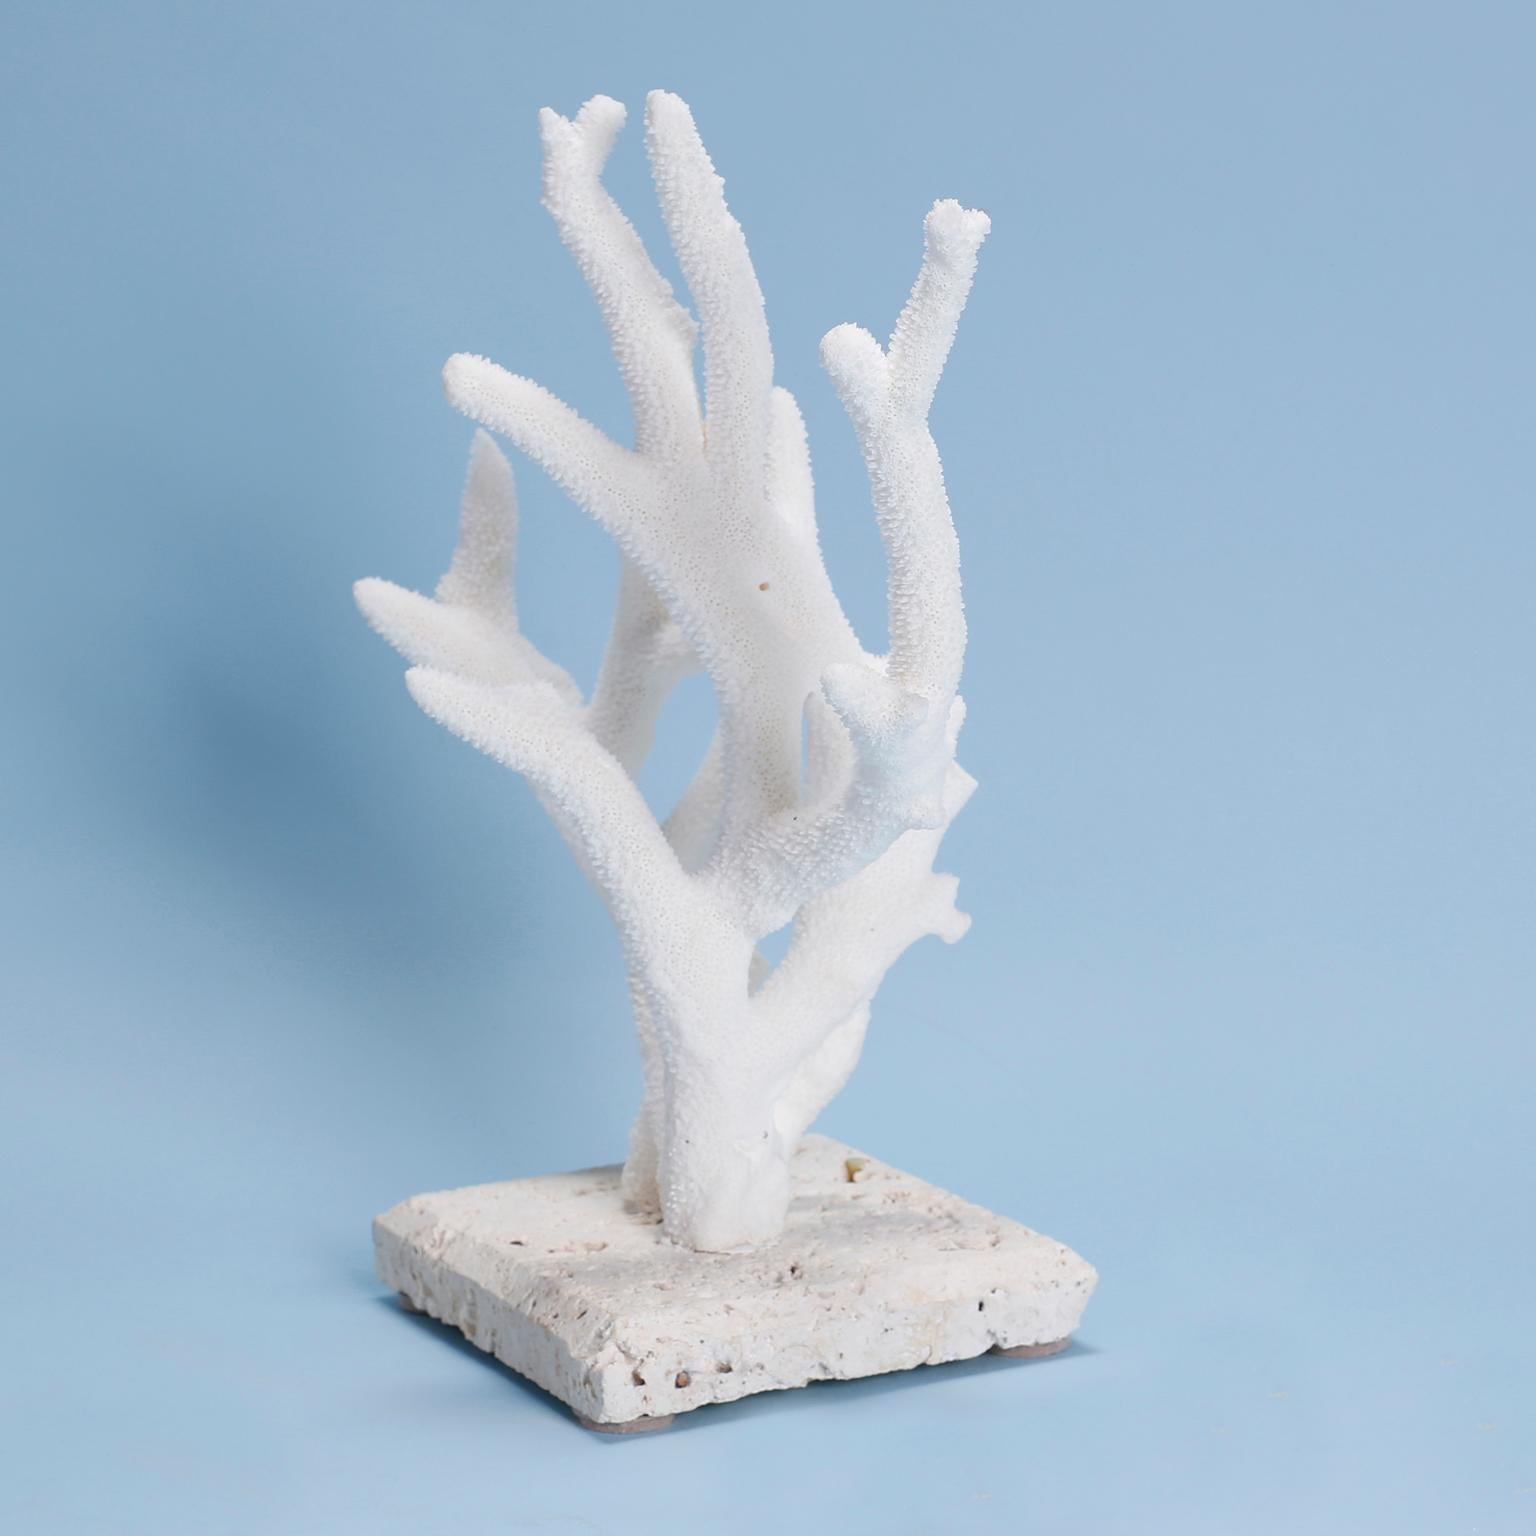 Authentic staghorn coral specimen with its clean bleached white color and organic textural form. Presented on a coquina stone base. 

Available only in the United States of America, shipping outside of the country requires Cities Permits, which are